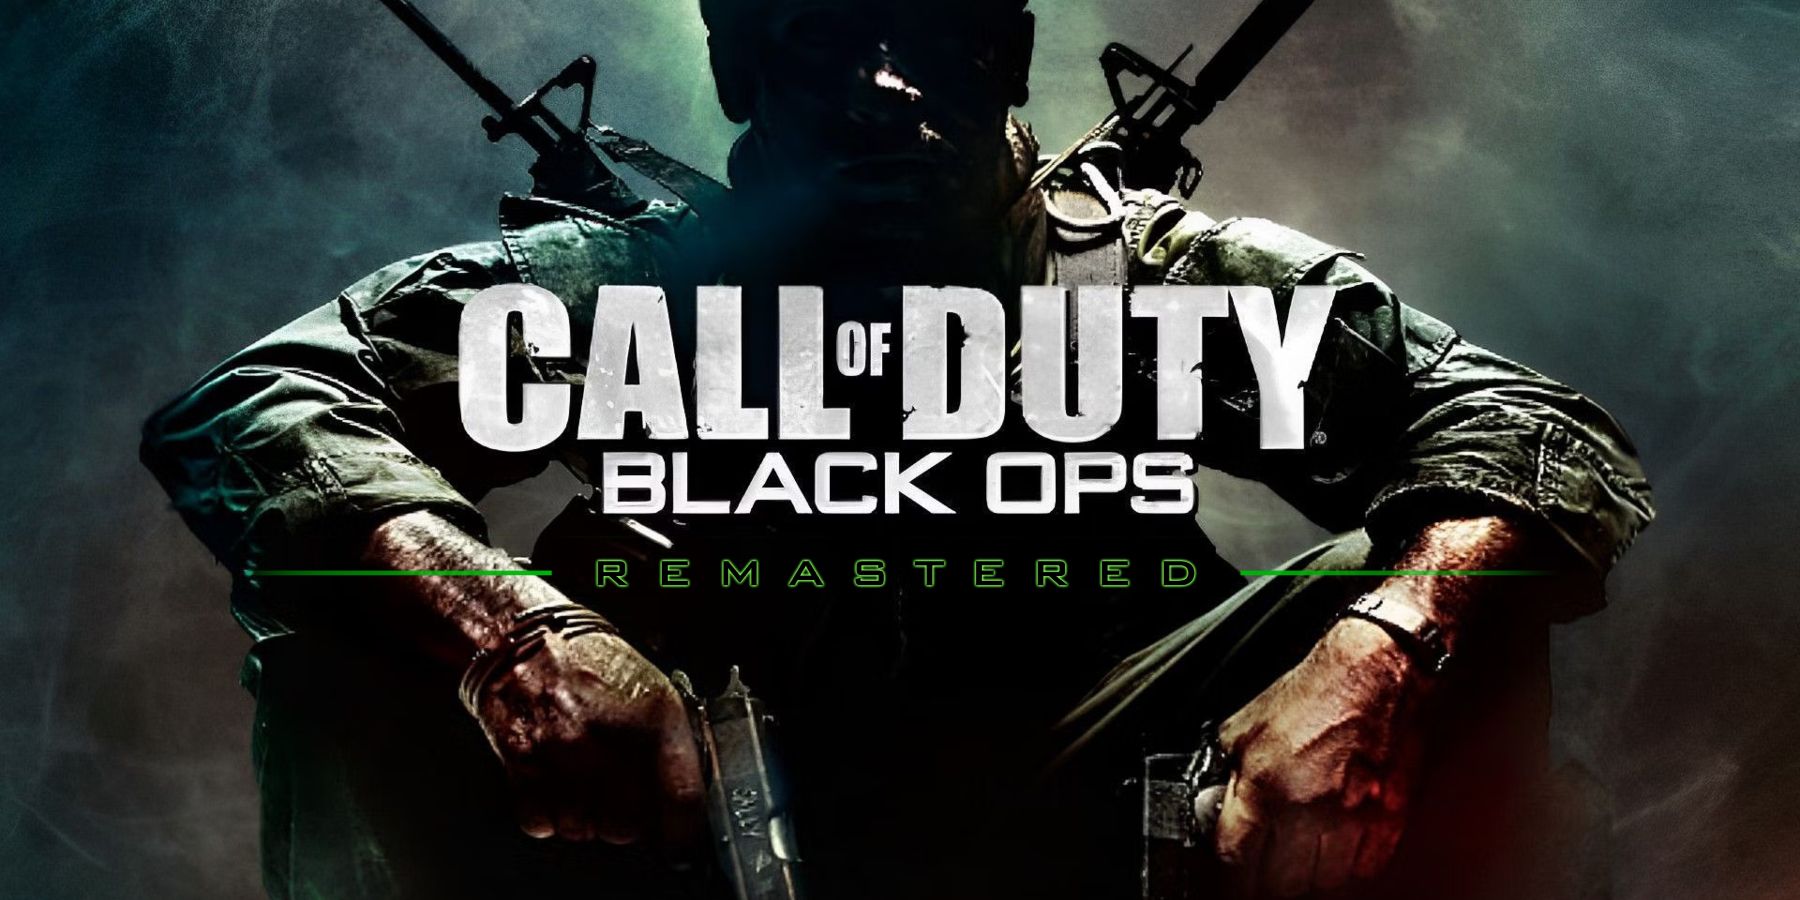 Call of Duty Black Ops 1 Remastered